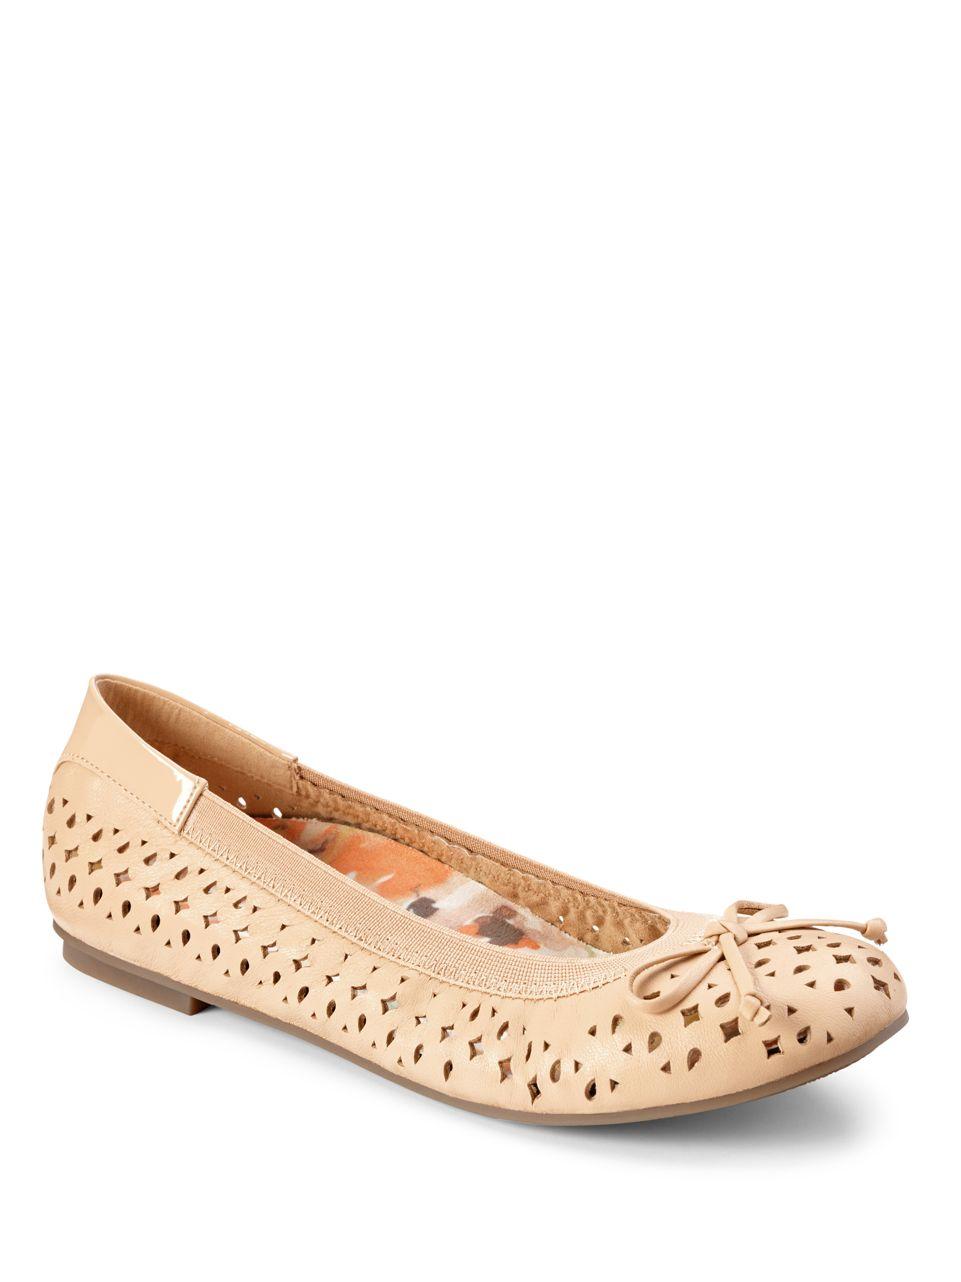 Vionic Surin Leather Perforated Ballet Flats in Natural | Lyst